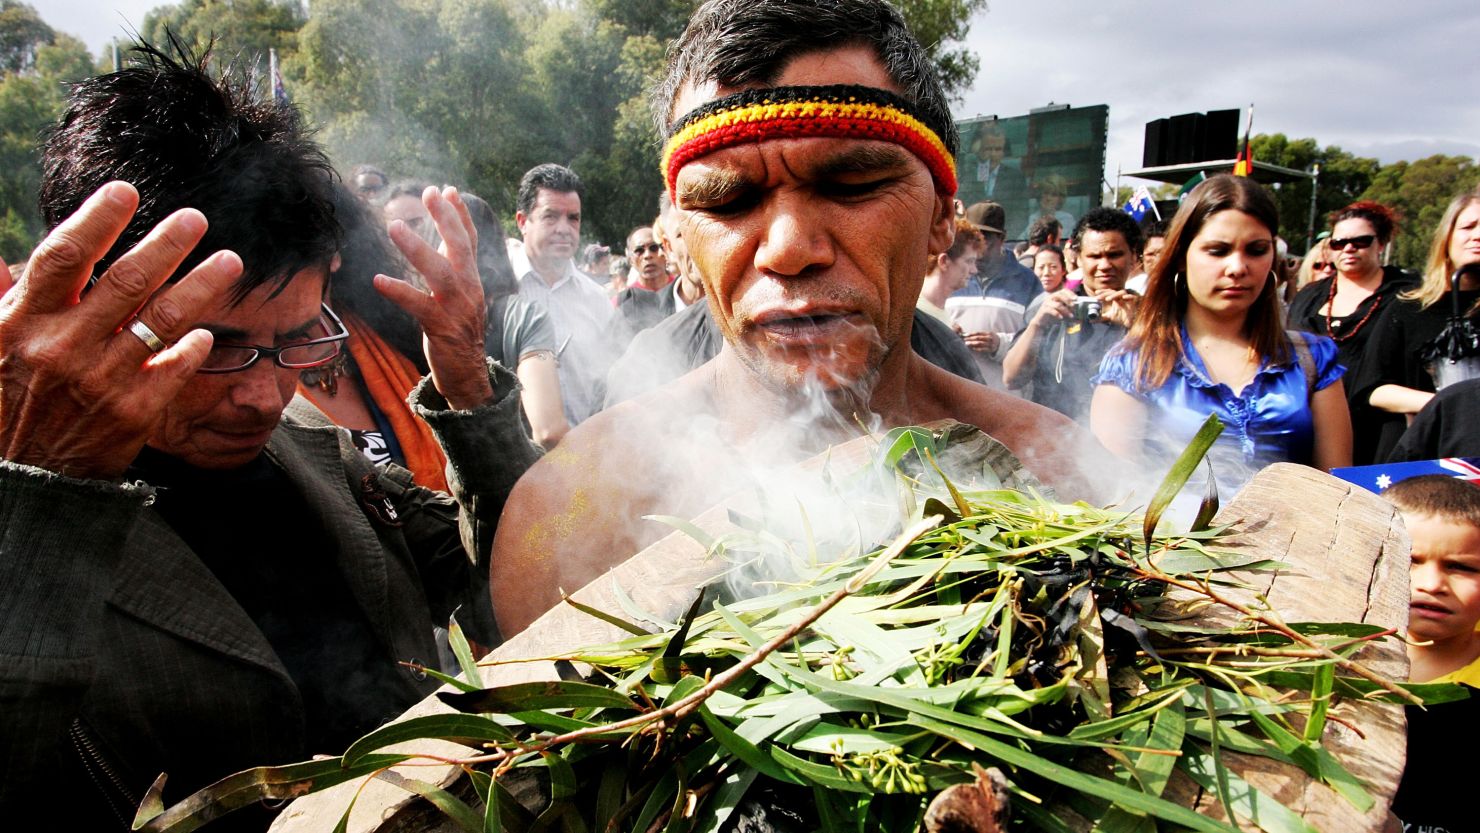 An Aboriginal man performs a smoke cleansing ceremony on the Parliament lawns, Canberra on February 13, 2008.